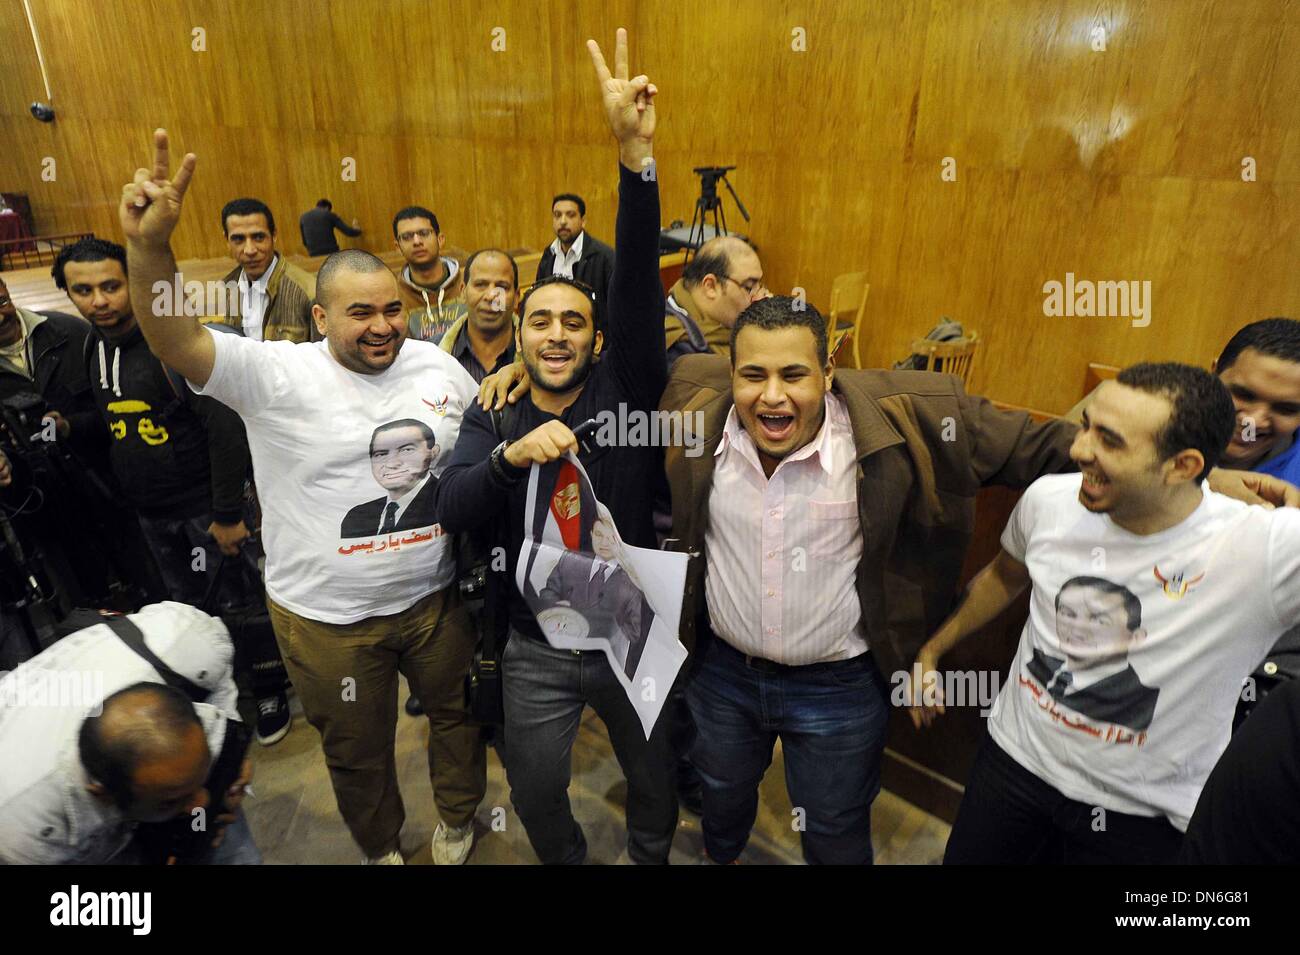 Cairo, Egypt. 19th Dec, 2013. Supporters of former Egyptian leader Hosni Mubarak celebrate at a court in Cairo, Egypt on Dec. 19, 2013. An Egyptian court on Thursday ordered to acquit Mubarak's two sons Alaa and Gamal, and former prime minister Ahmed Shafiq, who were charged of misuse of public funds, Middle East News Agency reported. Credit:  Ahmed Omar/Xinhua/Alamy Live News Stock Photo